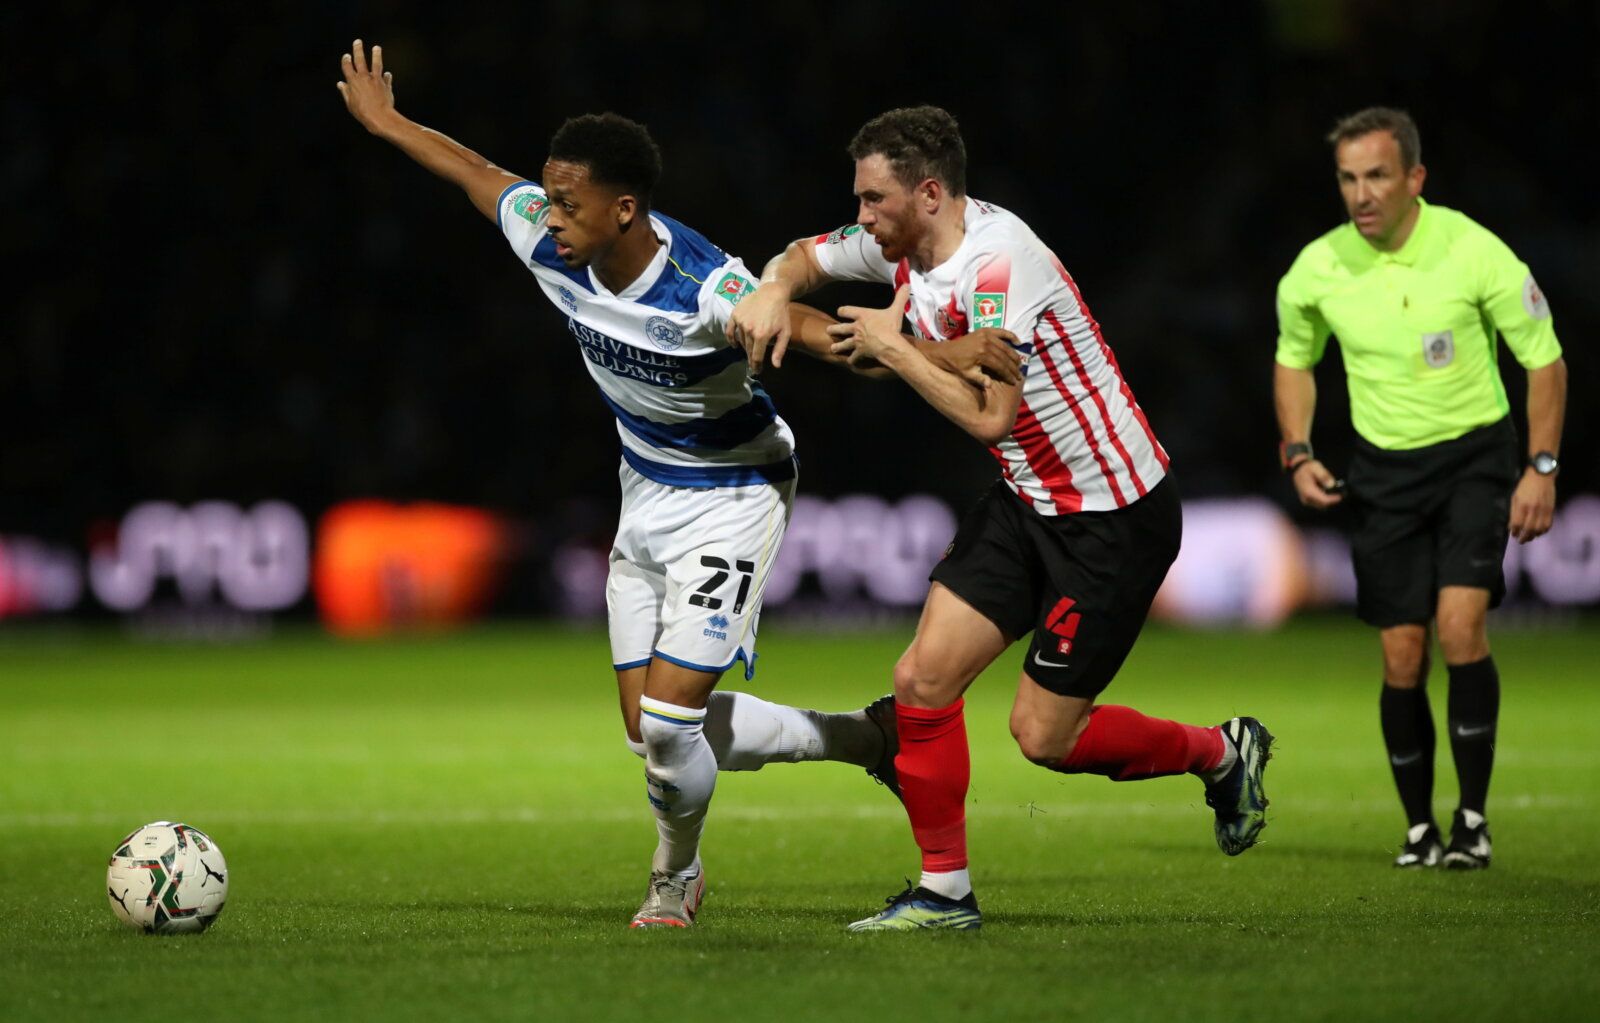 Soccer Football - Carabao Cup - Round of 16 - Queens Park Rangers v Sunderland - Loftus Road, London, Britain - October 26, 2021 Queens Park Rangers' Chris Willock in action with Sunderland?s Corry Evans  Action Images/Peter Cziborra  EDITORIAL USE ONLY. No use with unauthorized audio, video, data, fixture lists, club/league logos or 